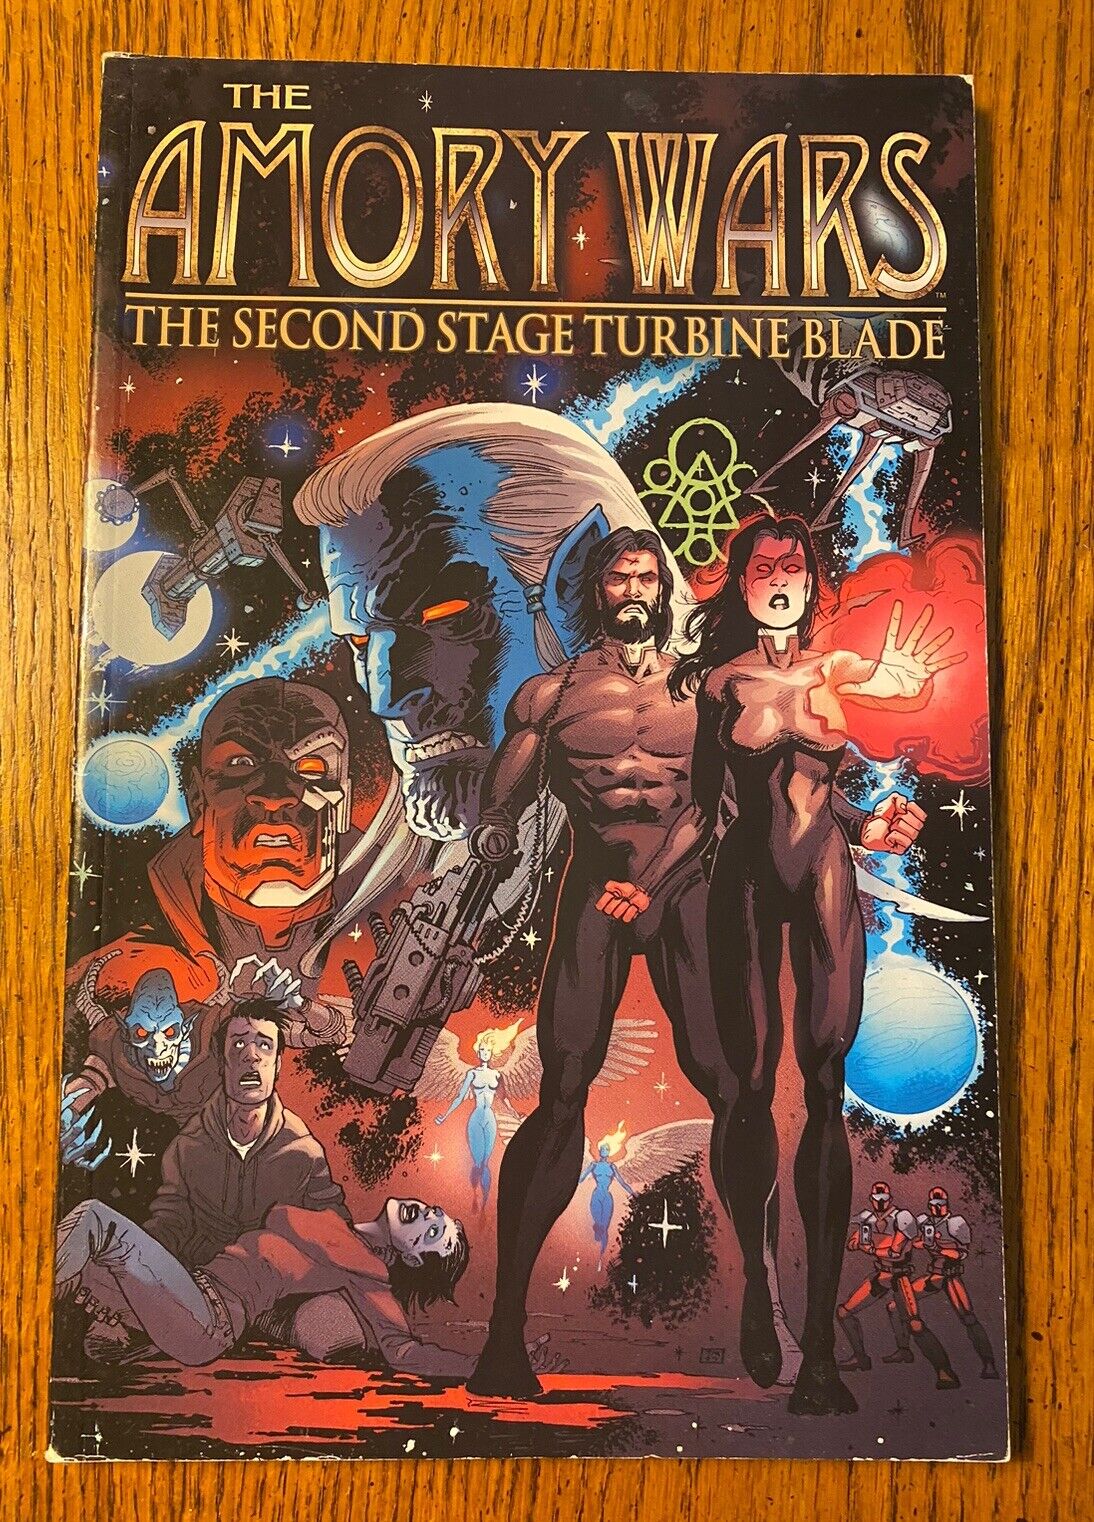 The Amory Wars: The Second Stage Turbine Blade TPB Comic Book, Coheed Cambria